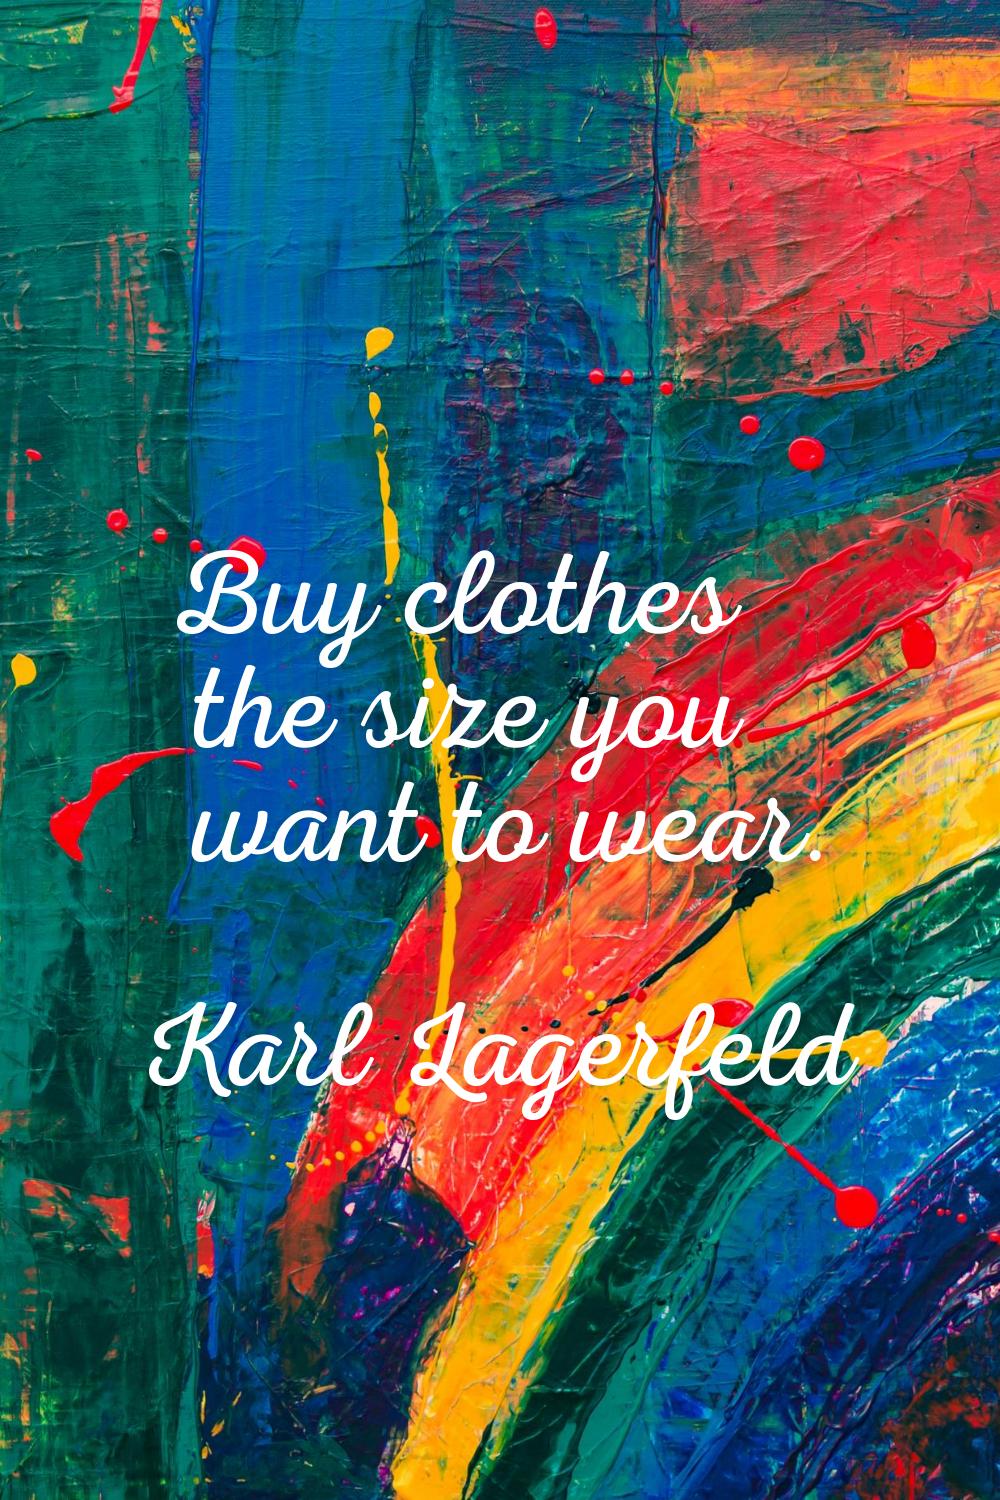 Buy clothes the size you want to wear.